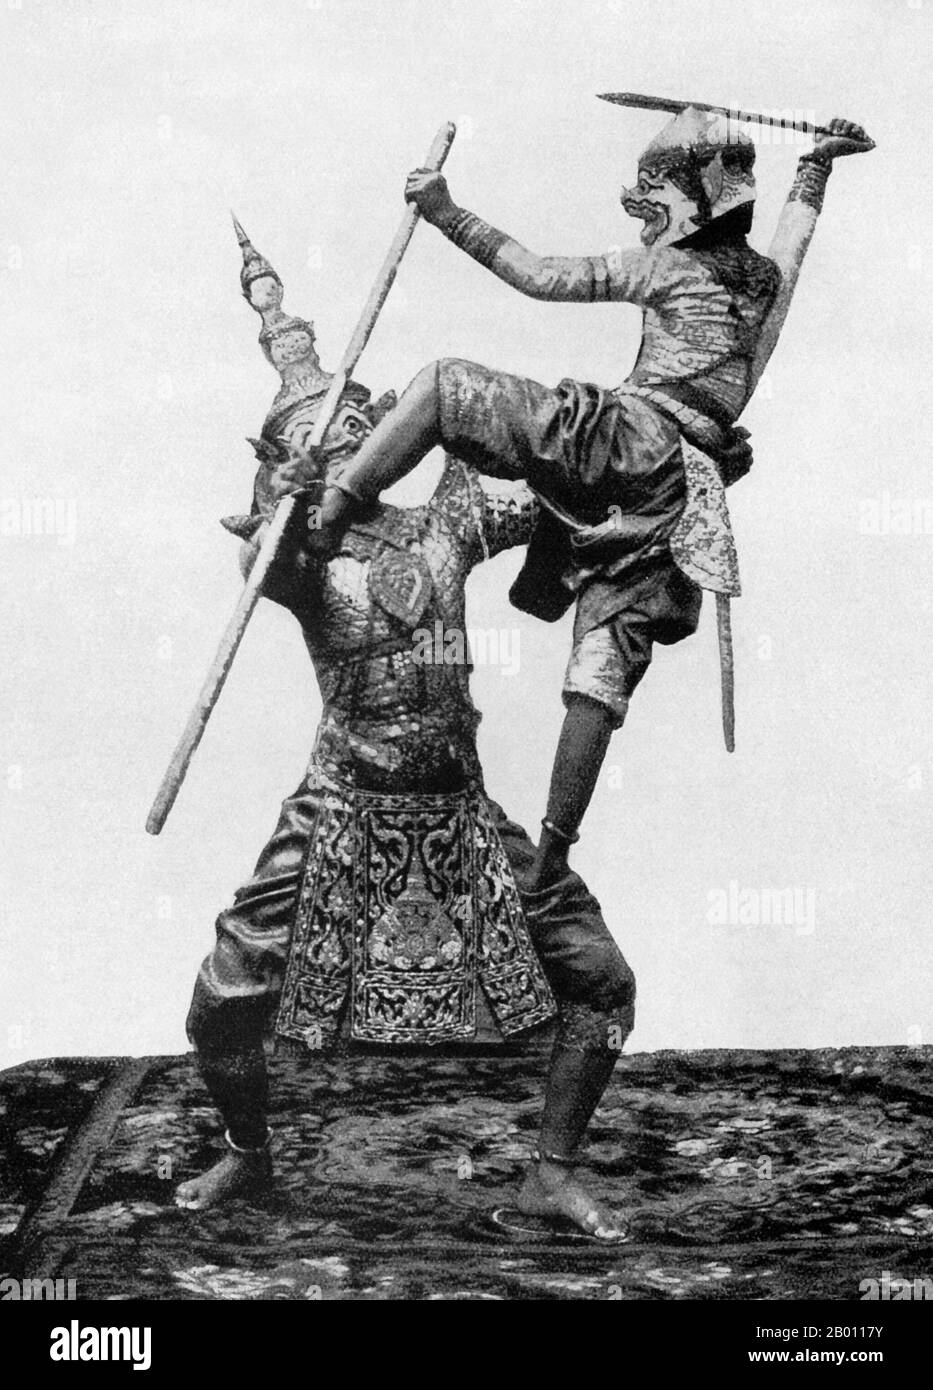 Thailand: Two Siamese theatre actors portray a fight scene between Thotsakan and Hanuman from the play ‘Ramakien’, c. 1900.  The Siamese were avid theatre-goers at the turn of the 20th century. Mime, dance, plays and shadow puppetry were all very popular. Many of the stage plays involved dancers, mostly female, who adorned themselves in jewellery and exhibited lithe movements portraying beauty and flexibility, especially in bending the fingers back. The most common plays were called ‘khon’, which essentially feature scenes from the ‘Ramakien’, the Thai version of the Hindu epic ‘The Ramayana’. Stock Photo